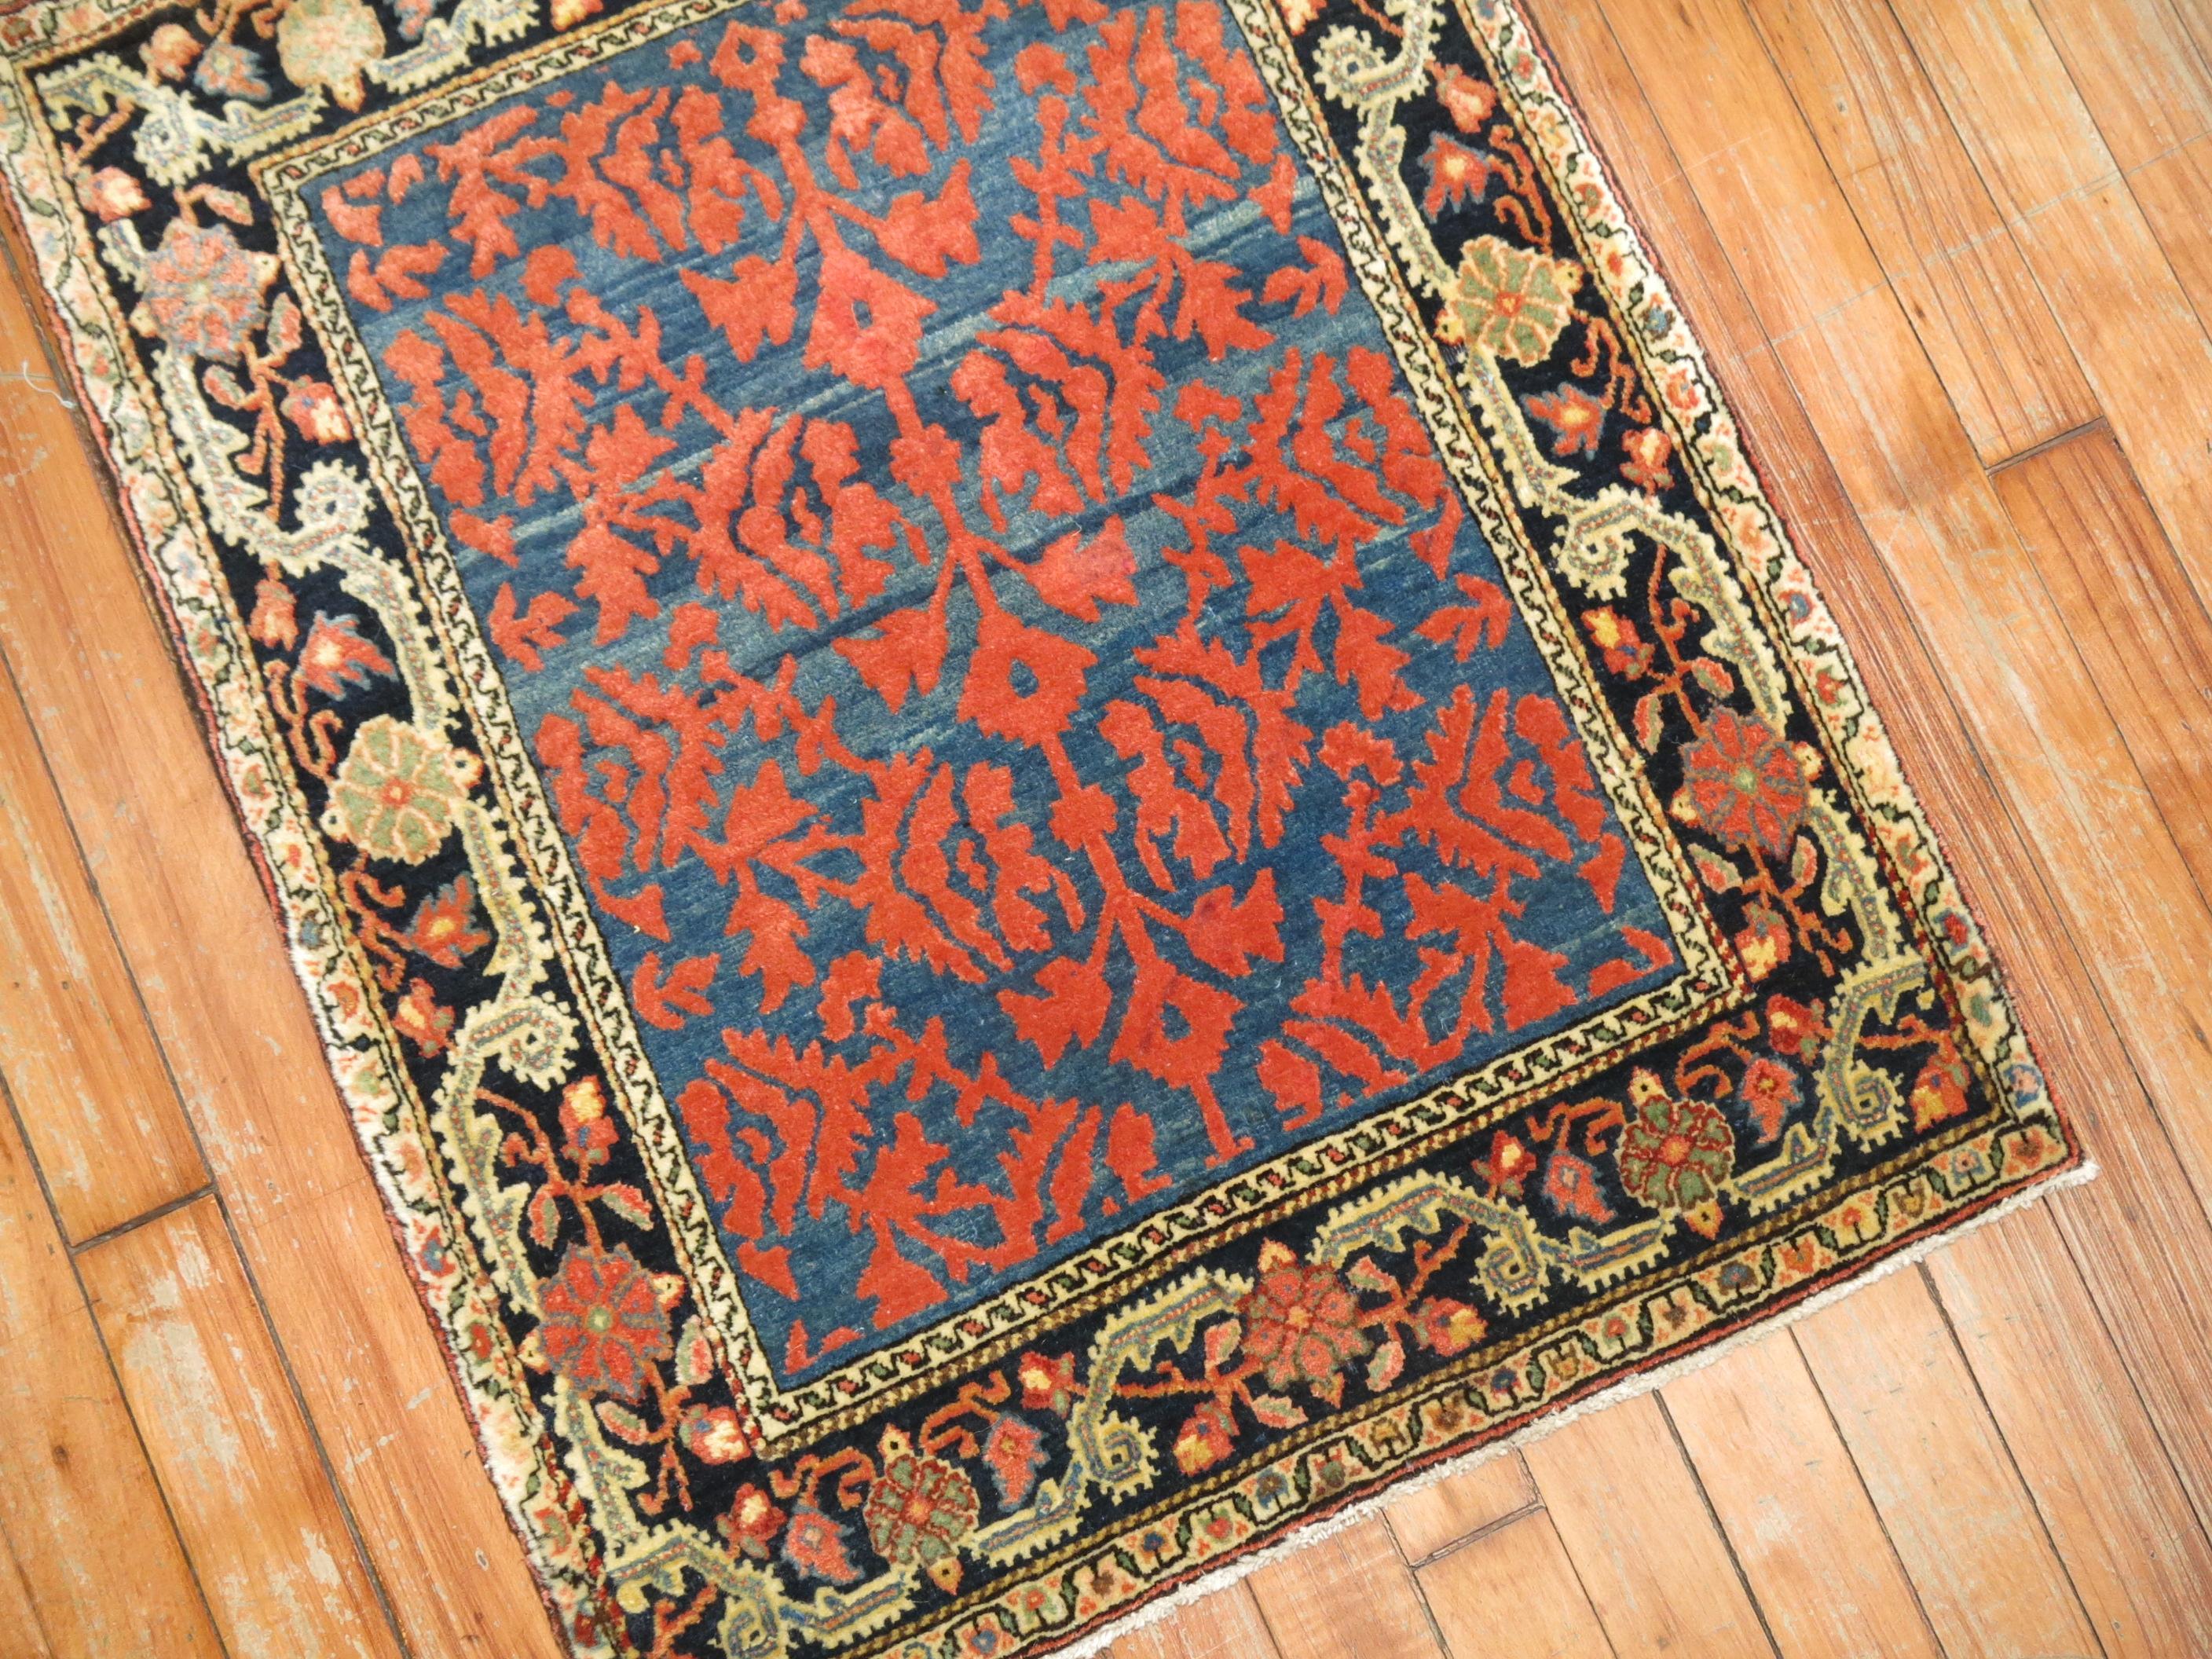 Hand-Carved Antique Persian Souf Jozan Mat For Sale